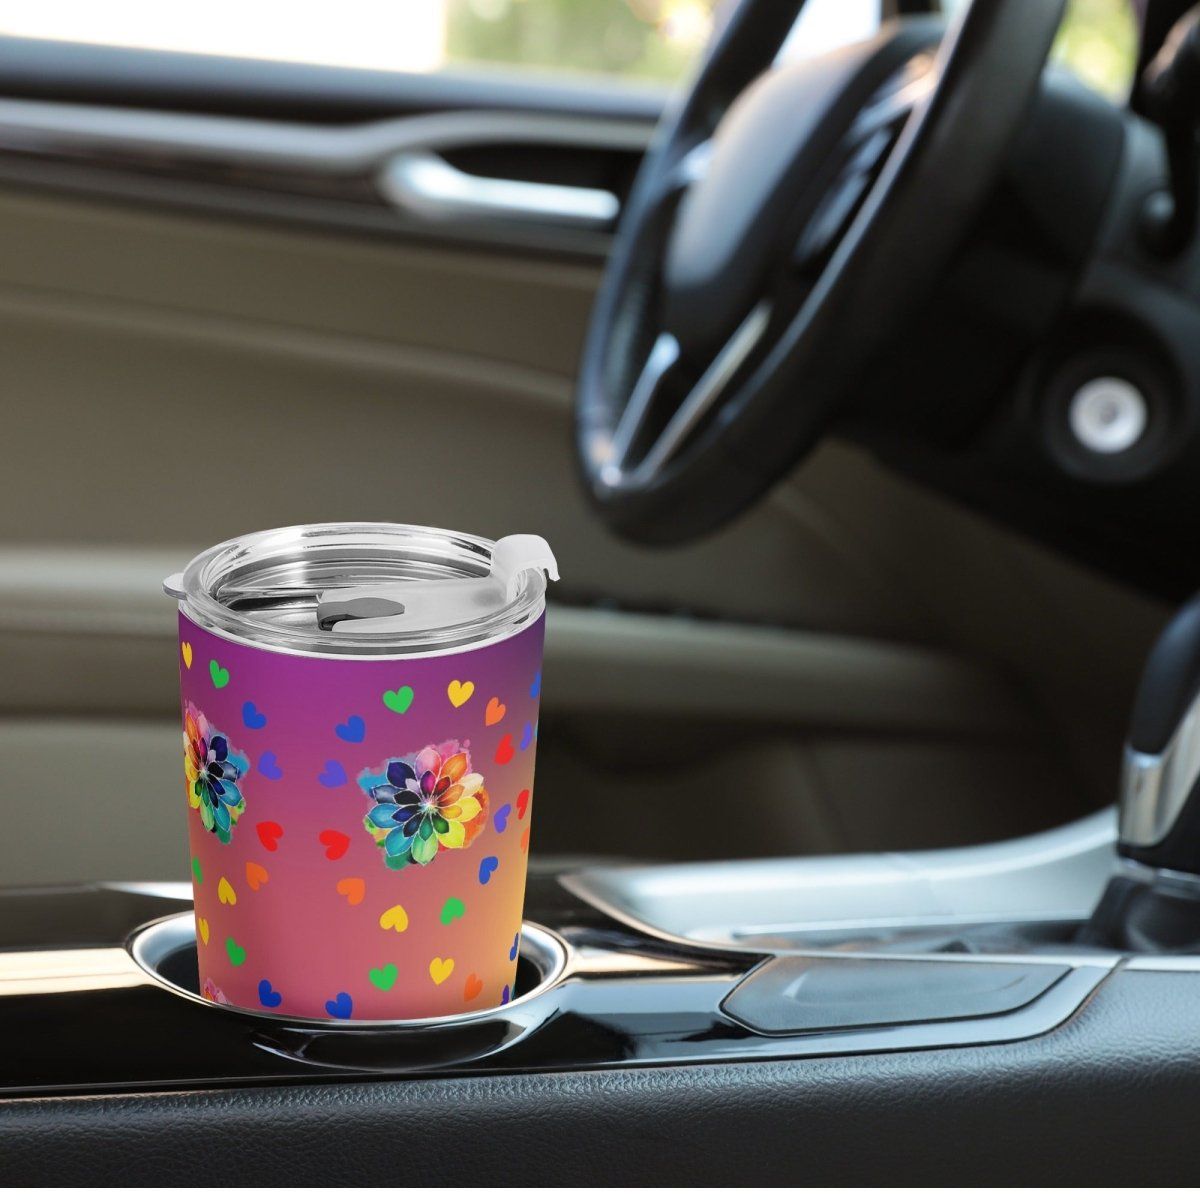 Rainbow Flowers Car Cup - Vibrant All Over Print for Colorful Style - Iron Phoenix GHG